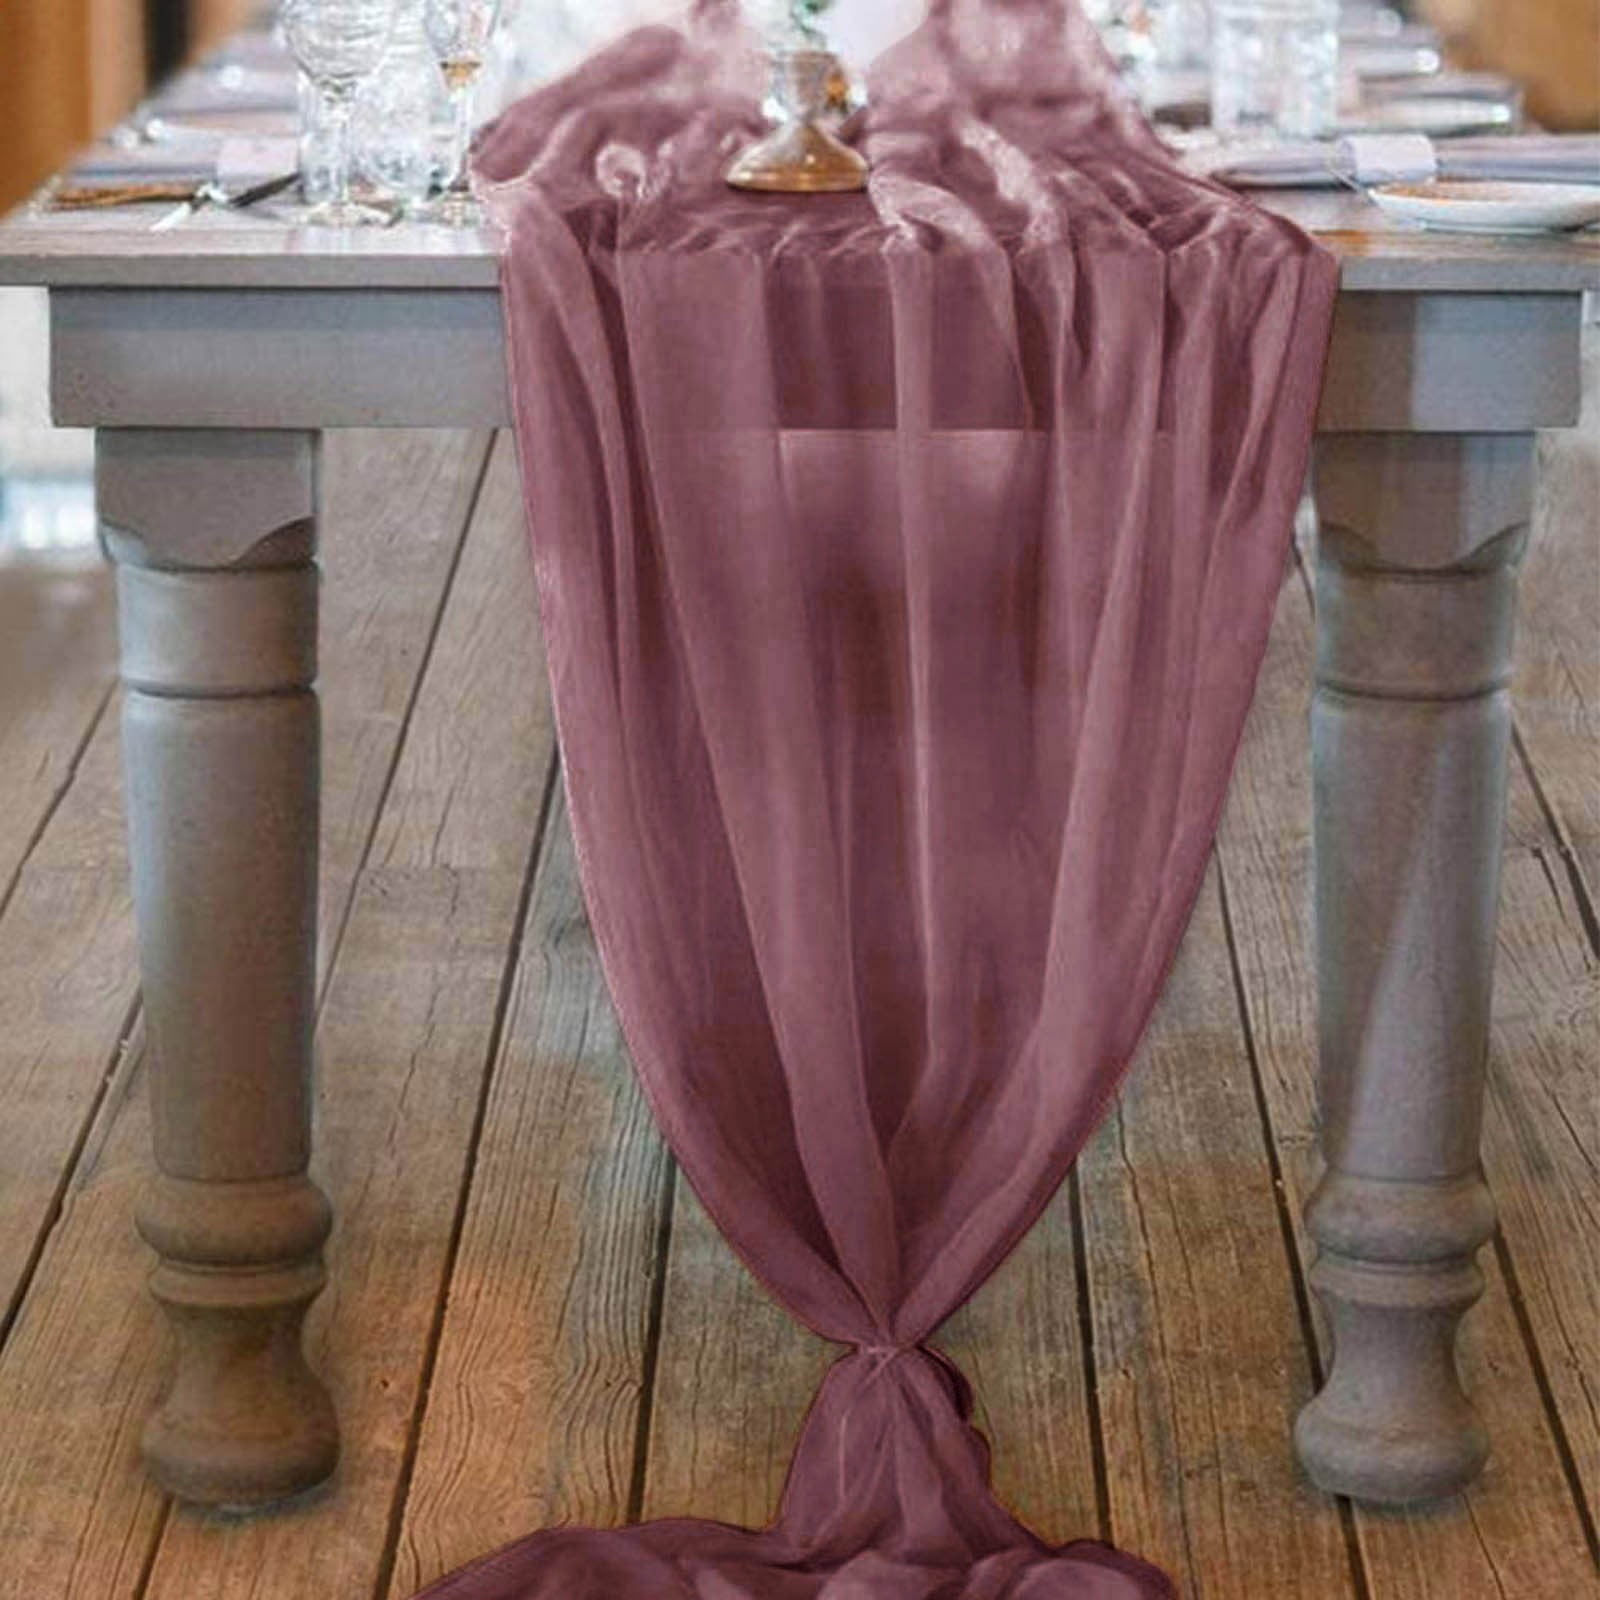 Black Wedding Linens Inc 12 x 108 Forest Taffeta Table Runners for Restaurant Kitchen Dining Wedding Party Banquet Events